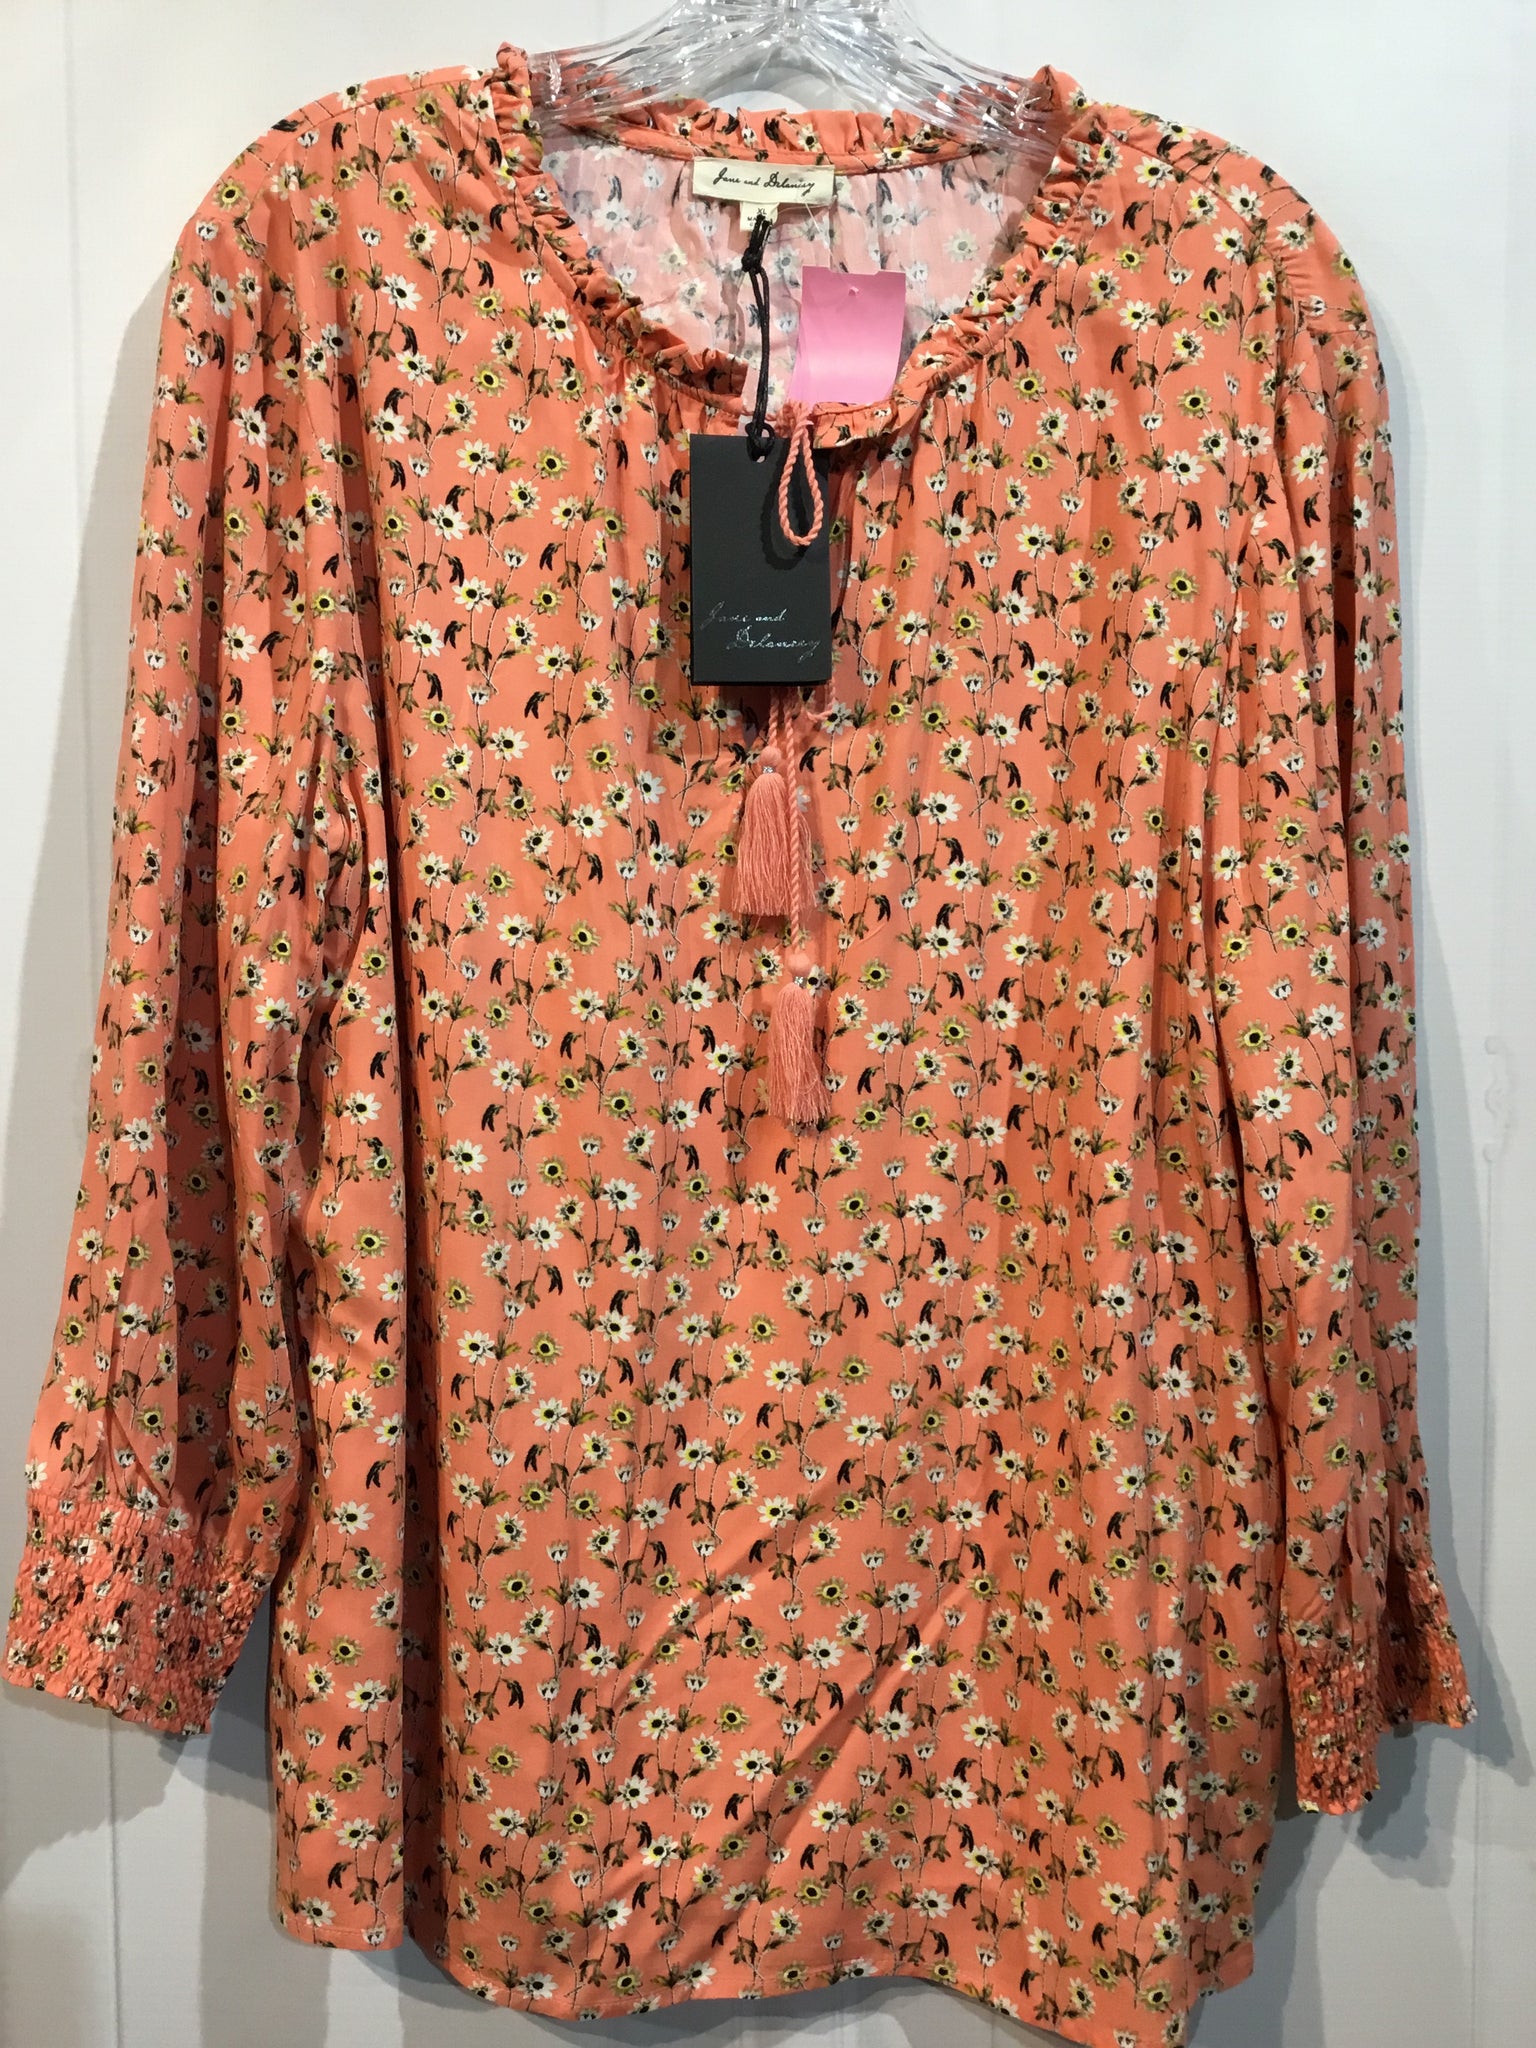 Jane and Delancey Size XL/16-18 Peach Print Tops